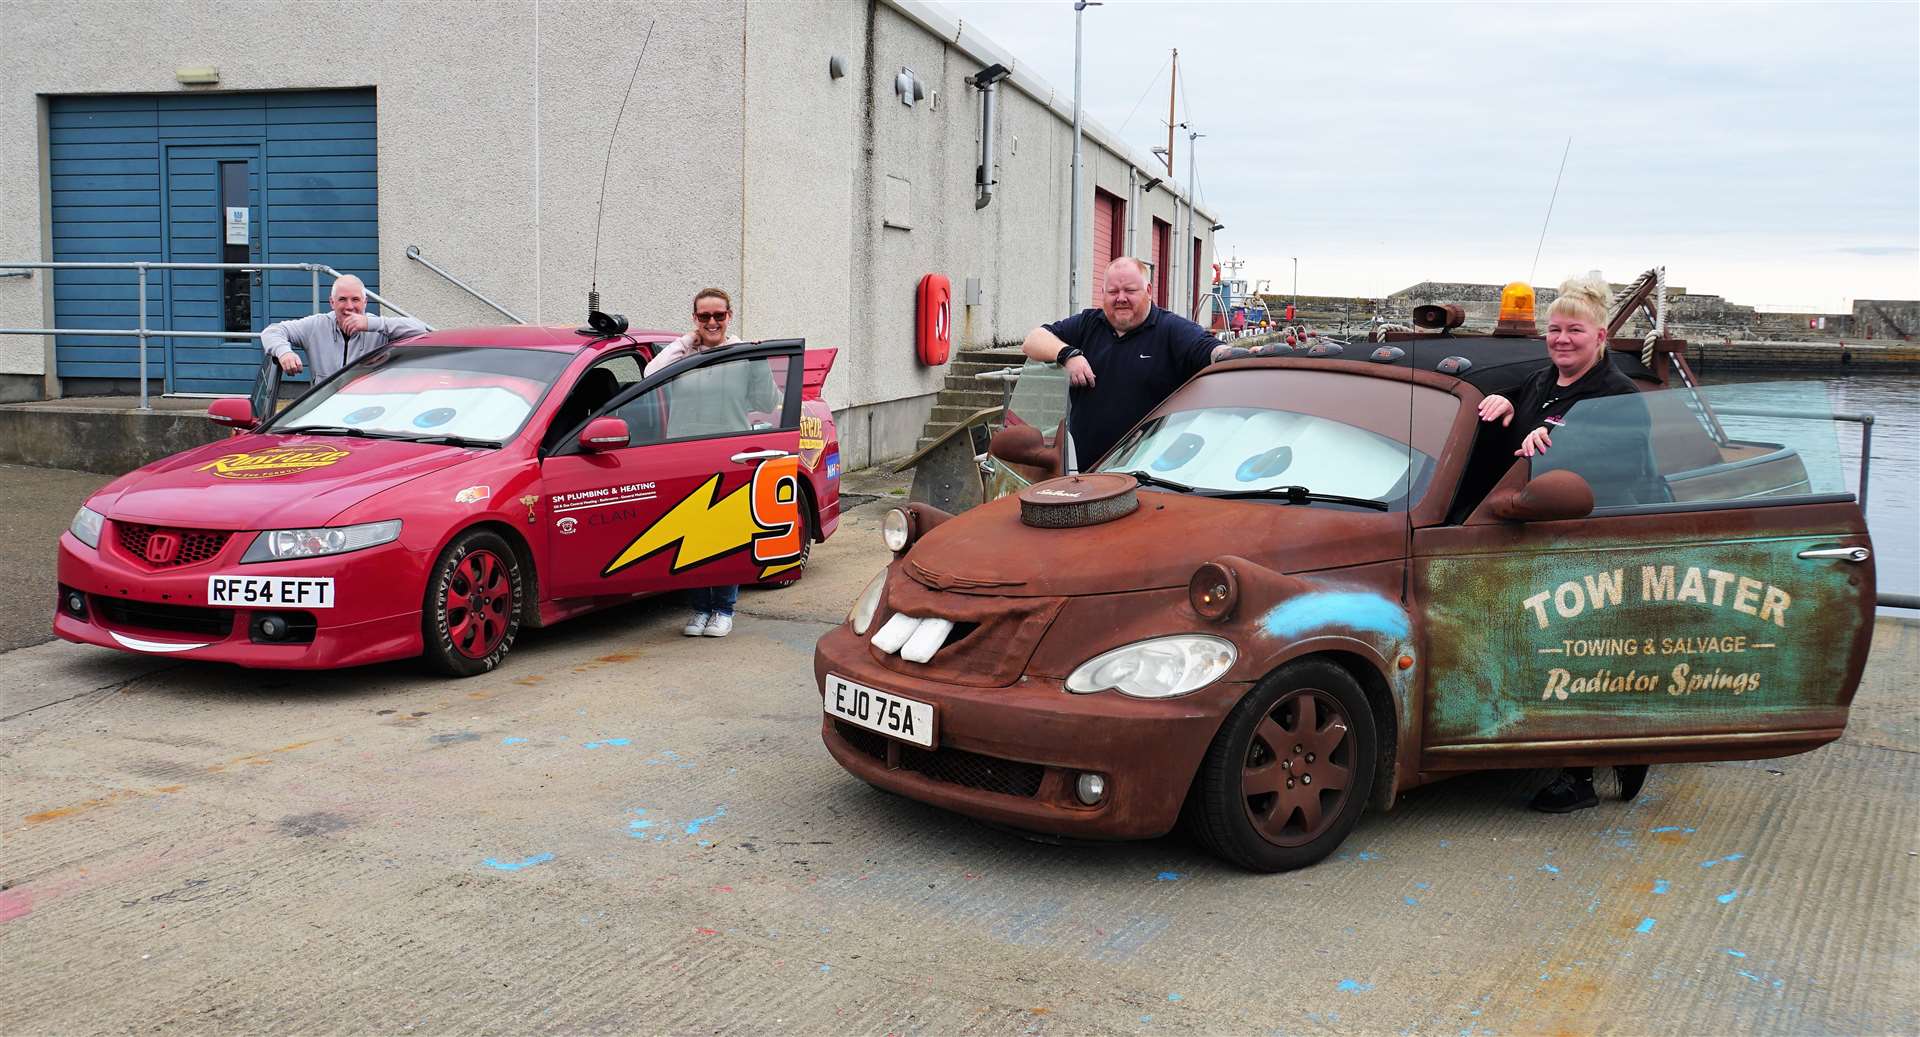 From left, Scott and Anita Morrison with their car Lightning McQueen next to Billy and Yvonne Campbell with Tow Mater. Pictures: DGS